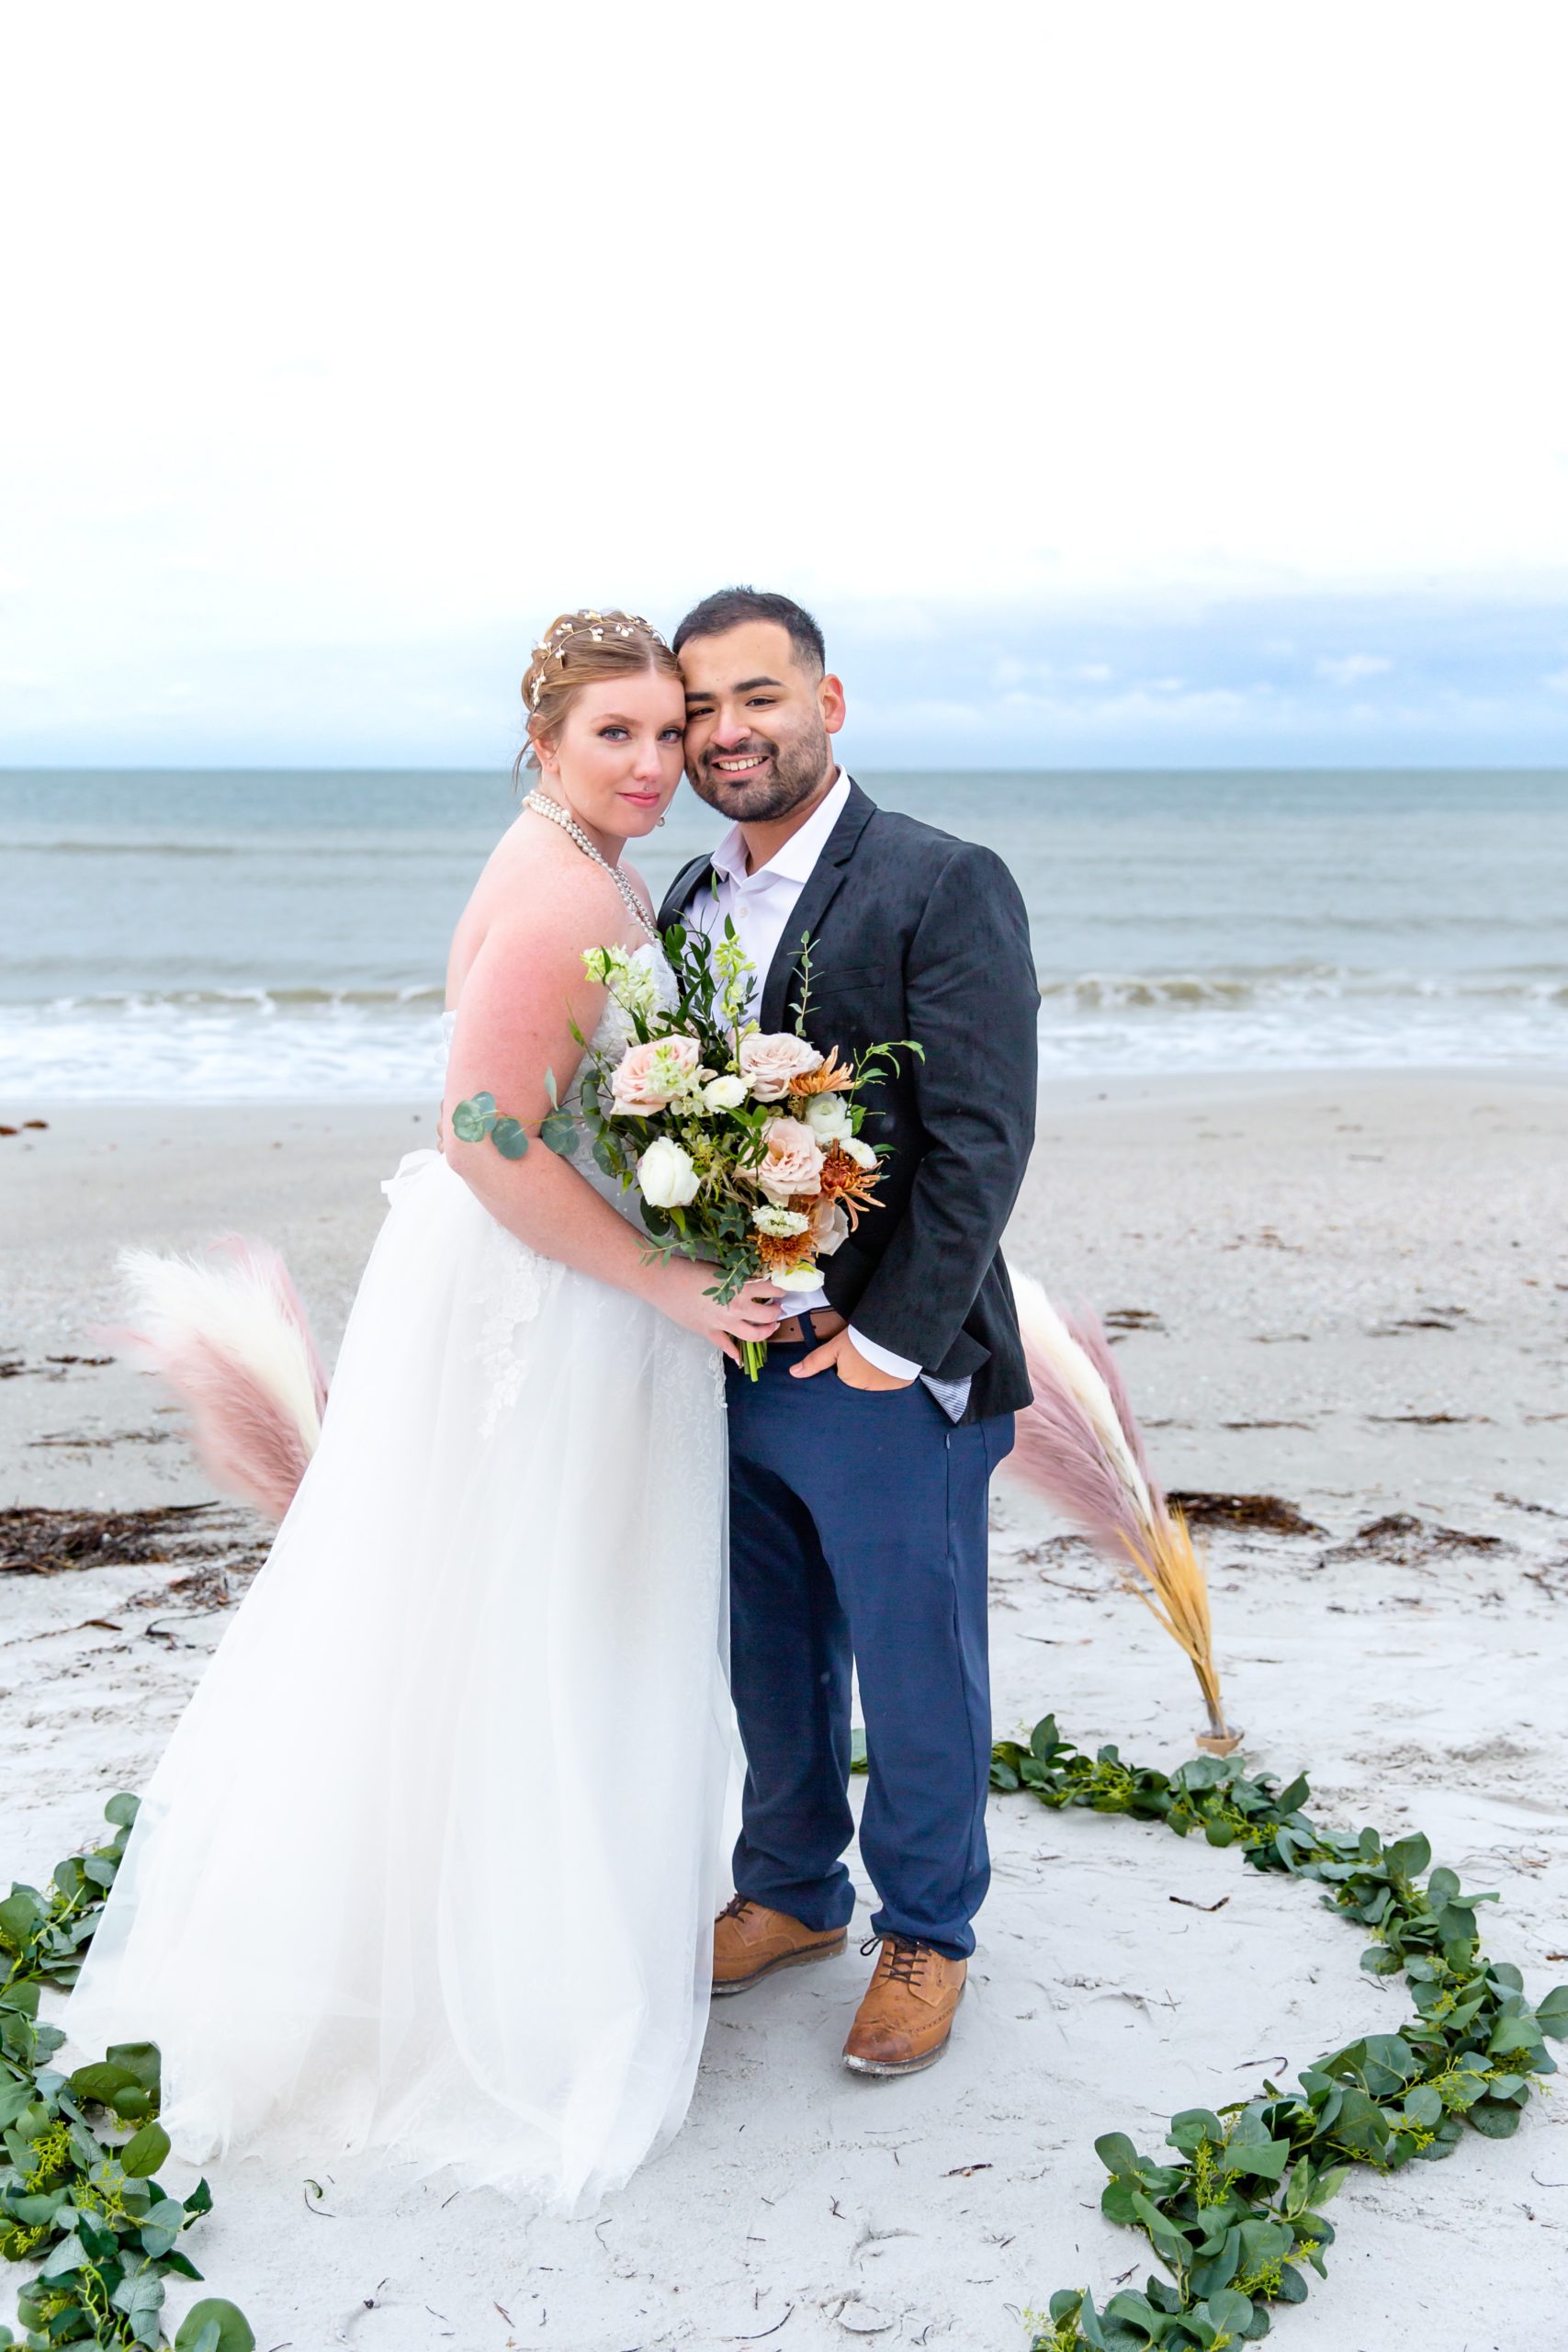 Bride & Groom at beach elopement ceremony with ivy decor in the sand at Treasure Island, Florida